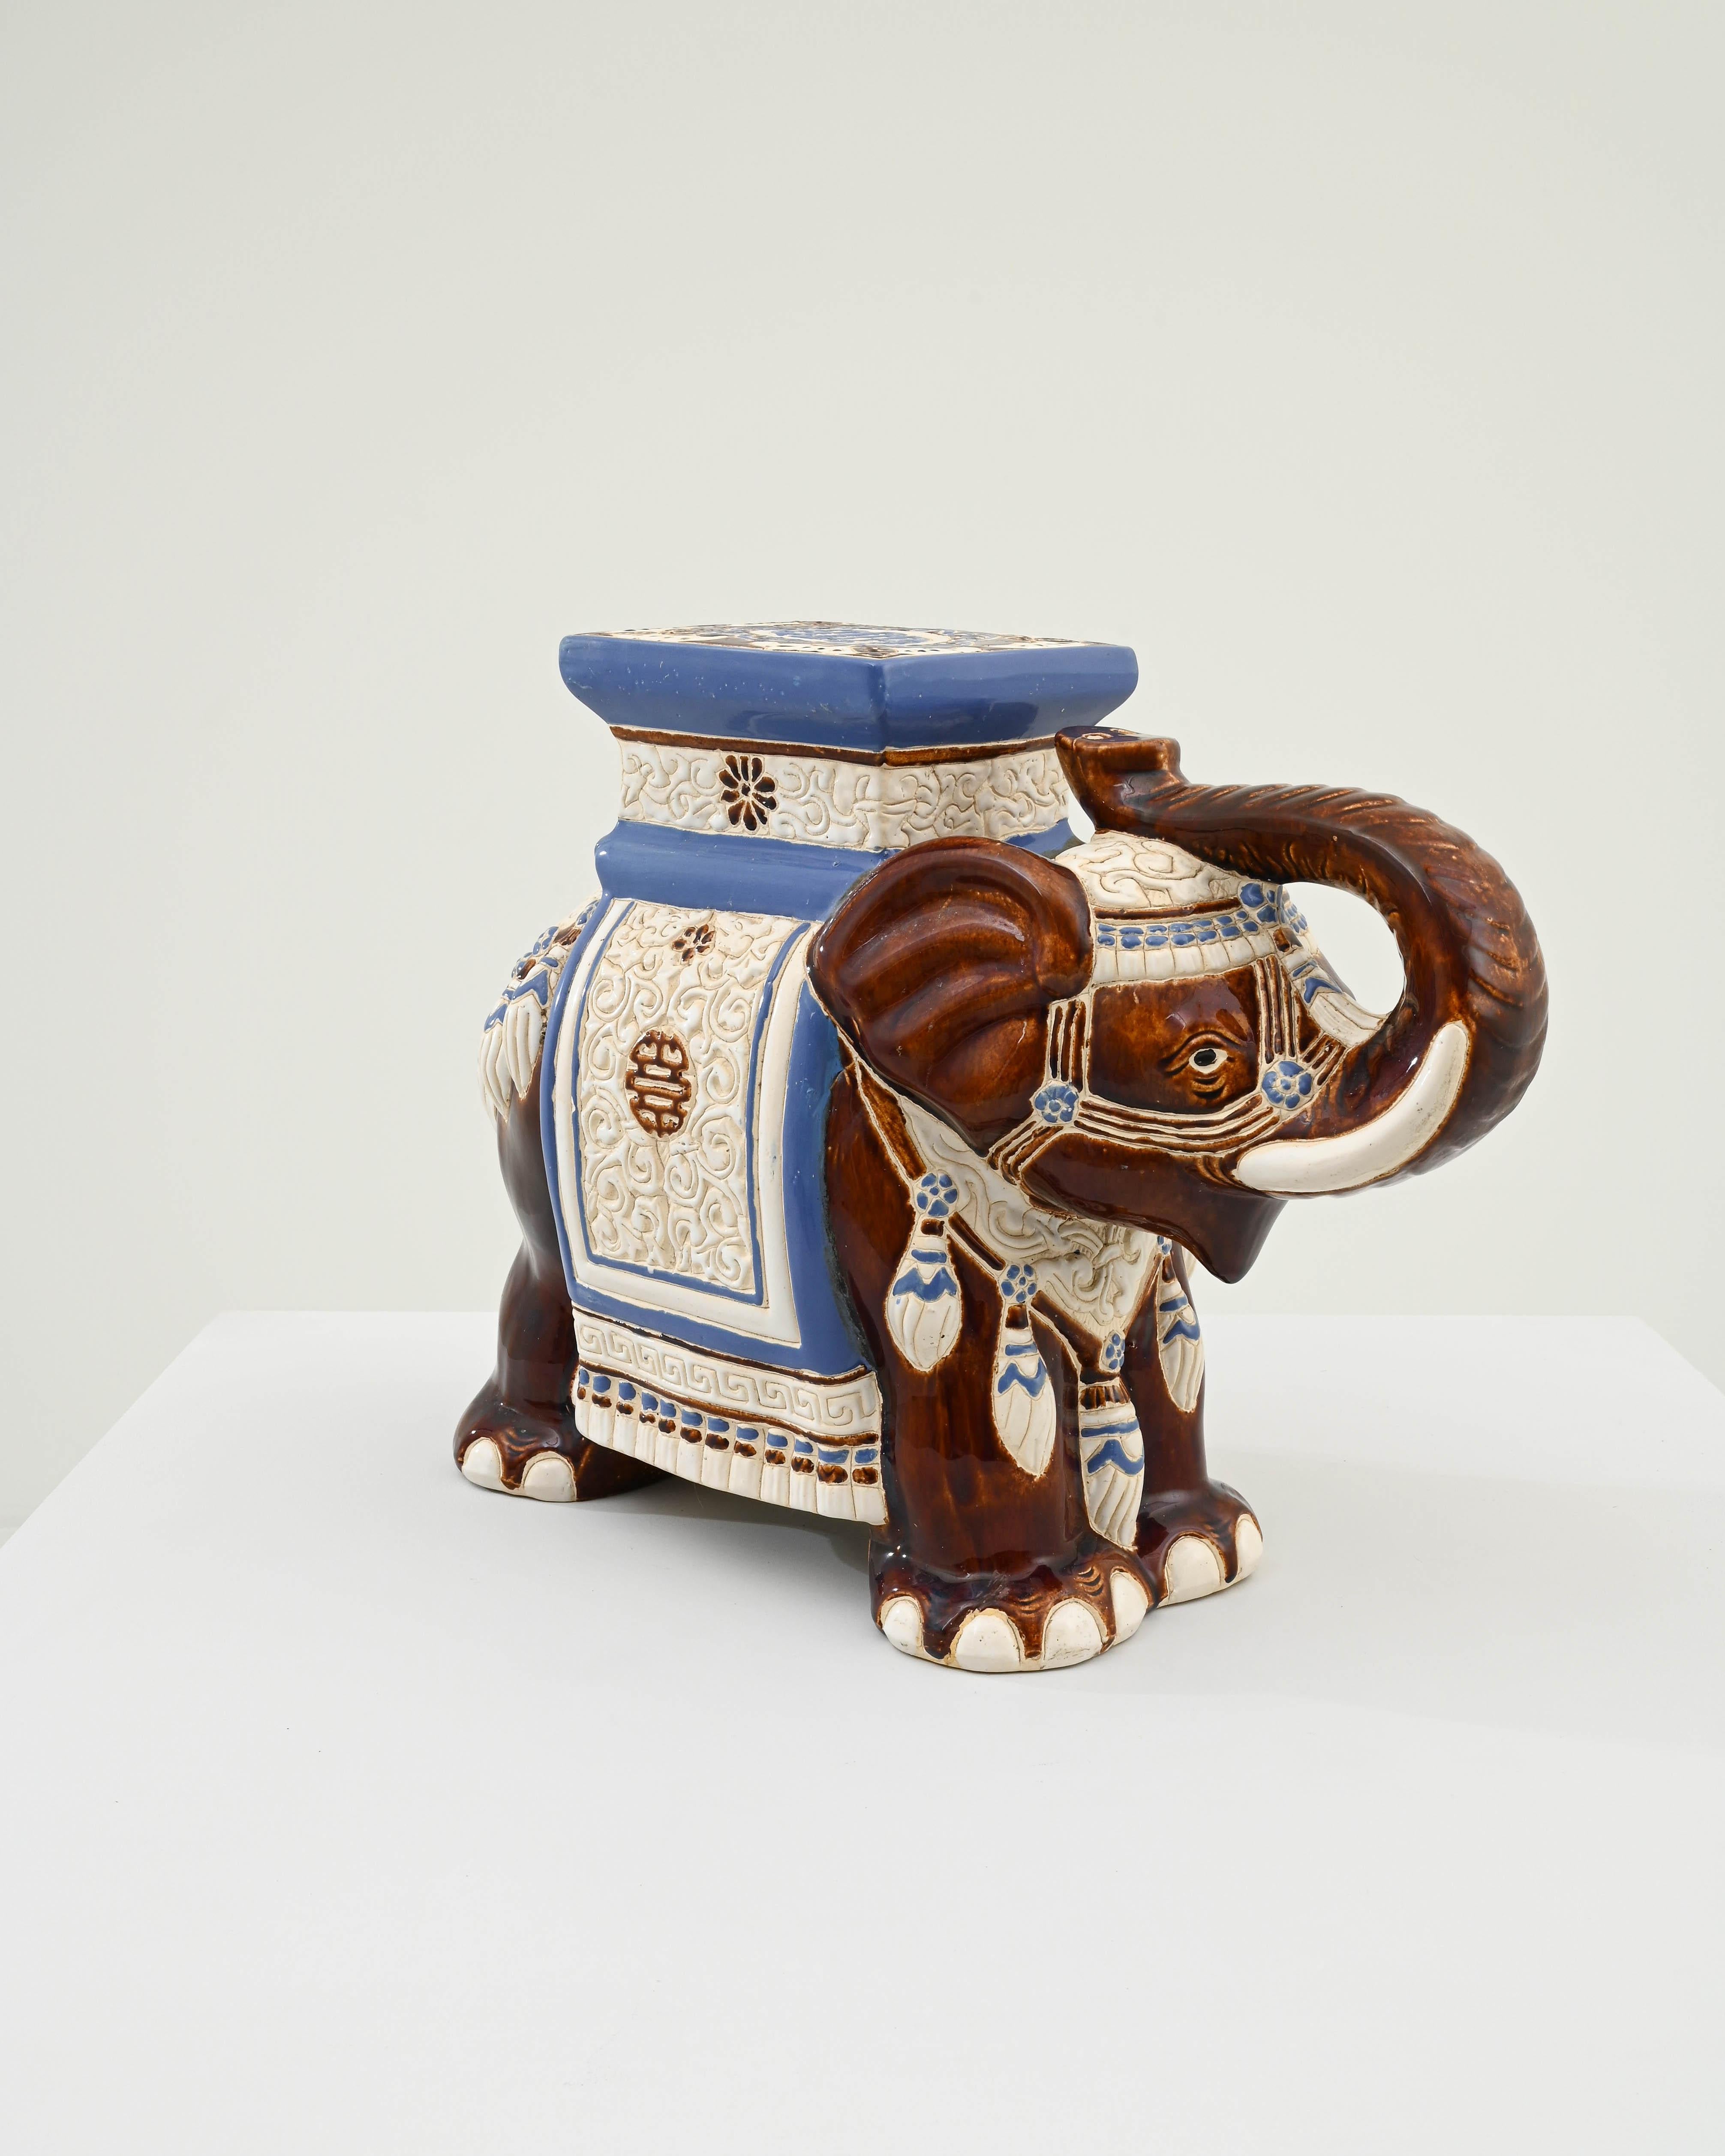 A ceramic decoration from 1960s France in the shape of an elephant. A saddle seat and blanket are glazed with pale blue and white, the elephant’s skin painted a rich burnt umber and laced with lines of the earth tone clay body; the assortment of